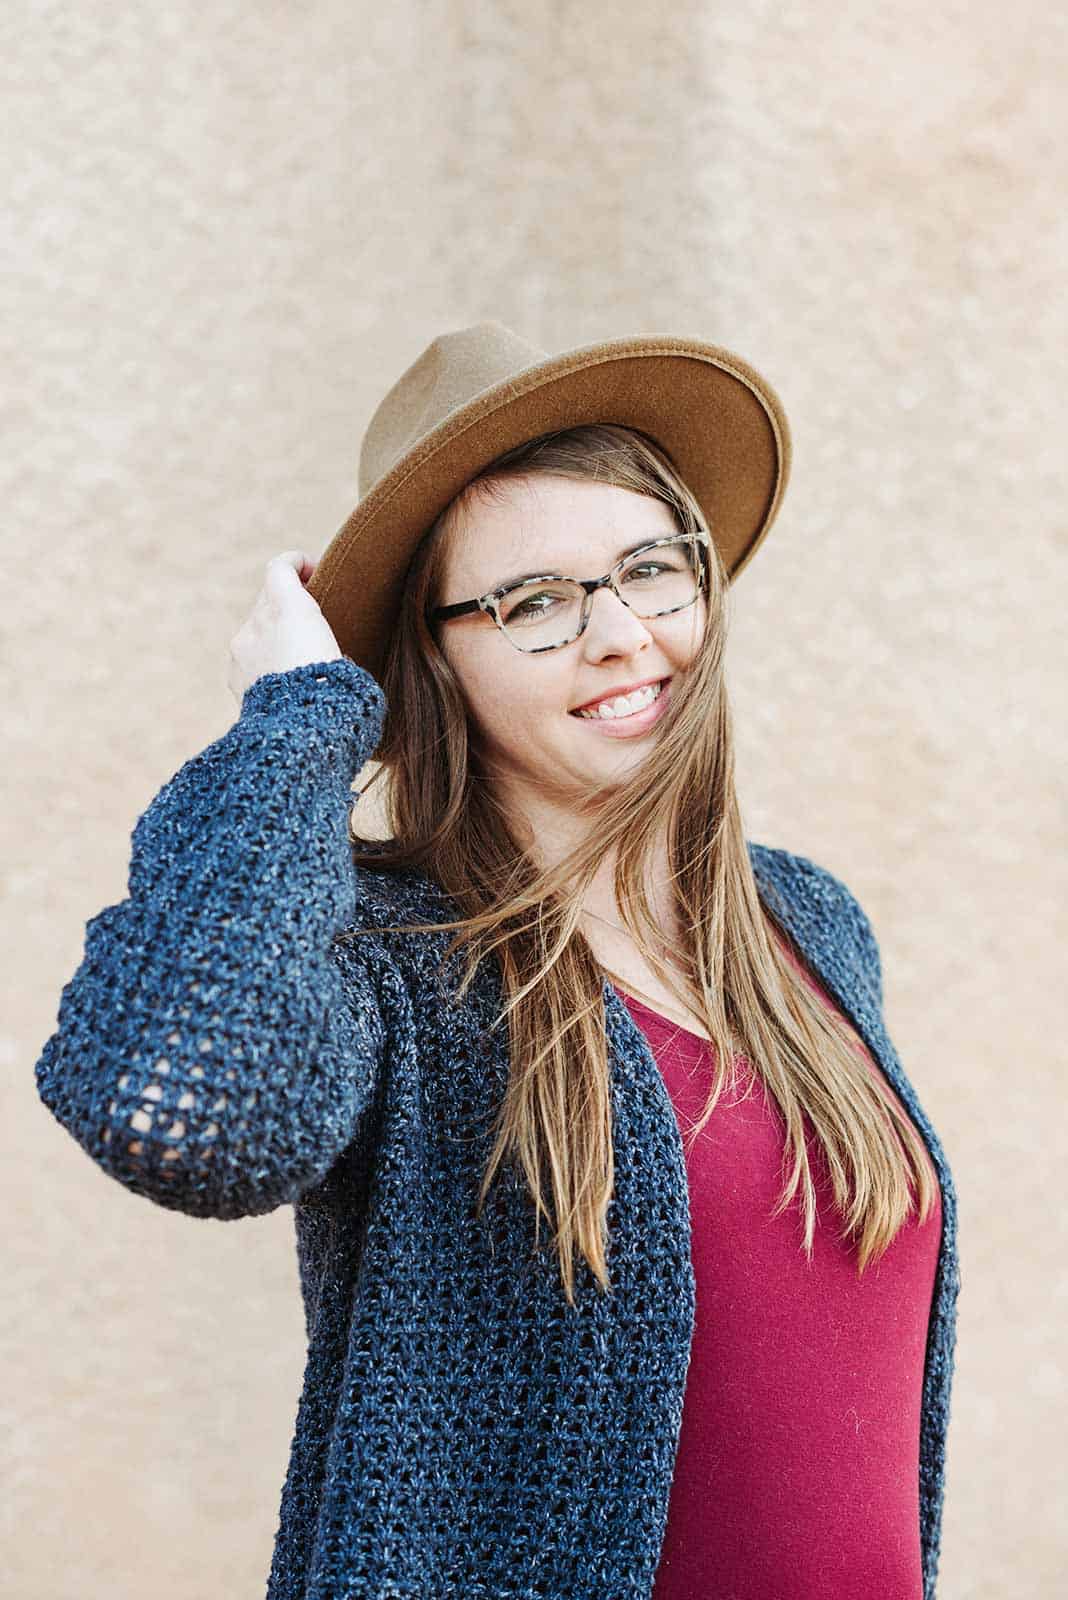 Woman standing in front of a white wall. She has light brown hair and is wearing tortoise shell galsses, a light brown wide-brimmed hat, a red shirt and a lightweight crochet cardigan. She is looking at the camera and smiling while touching her hat. 